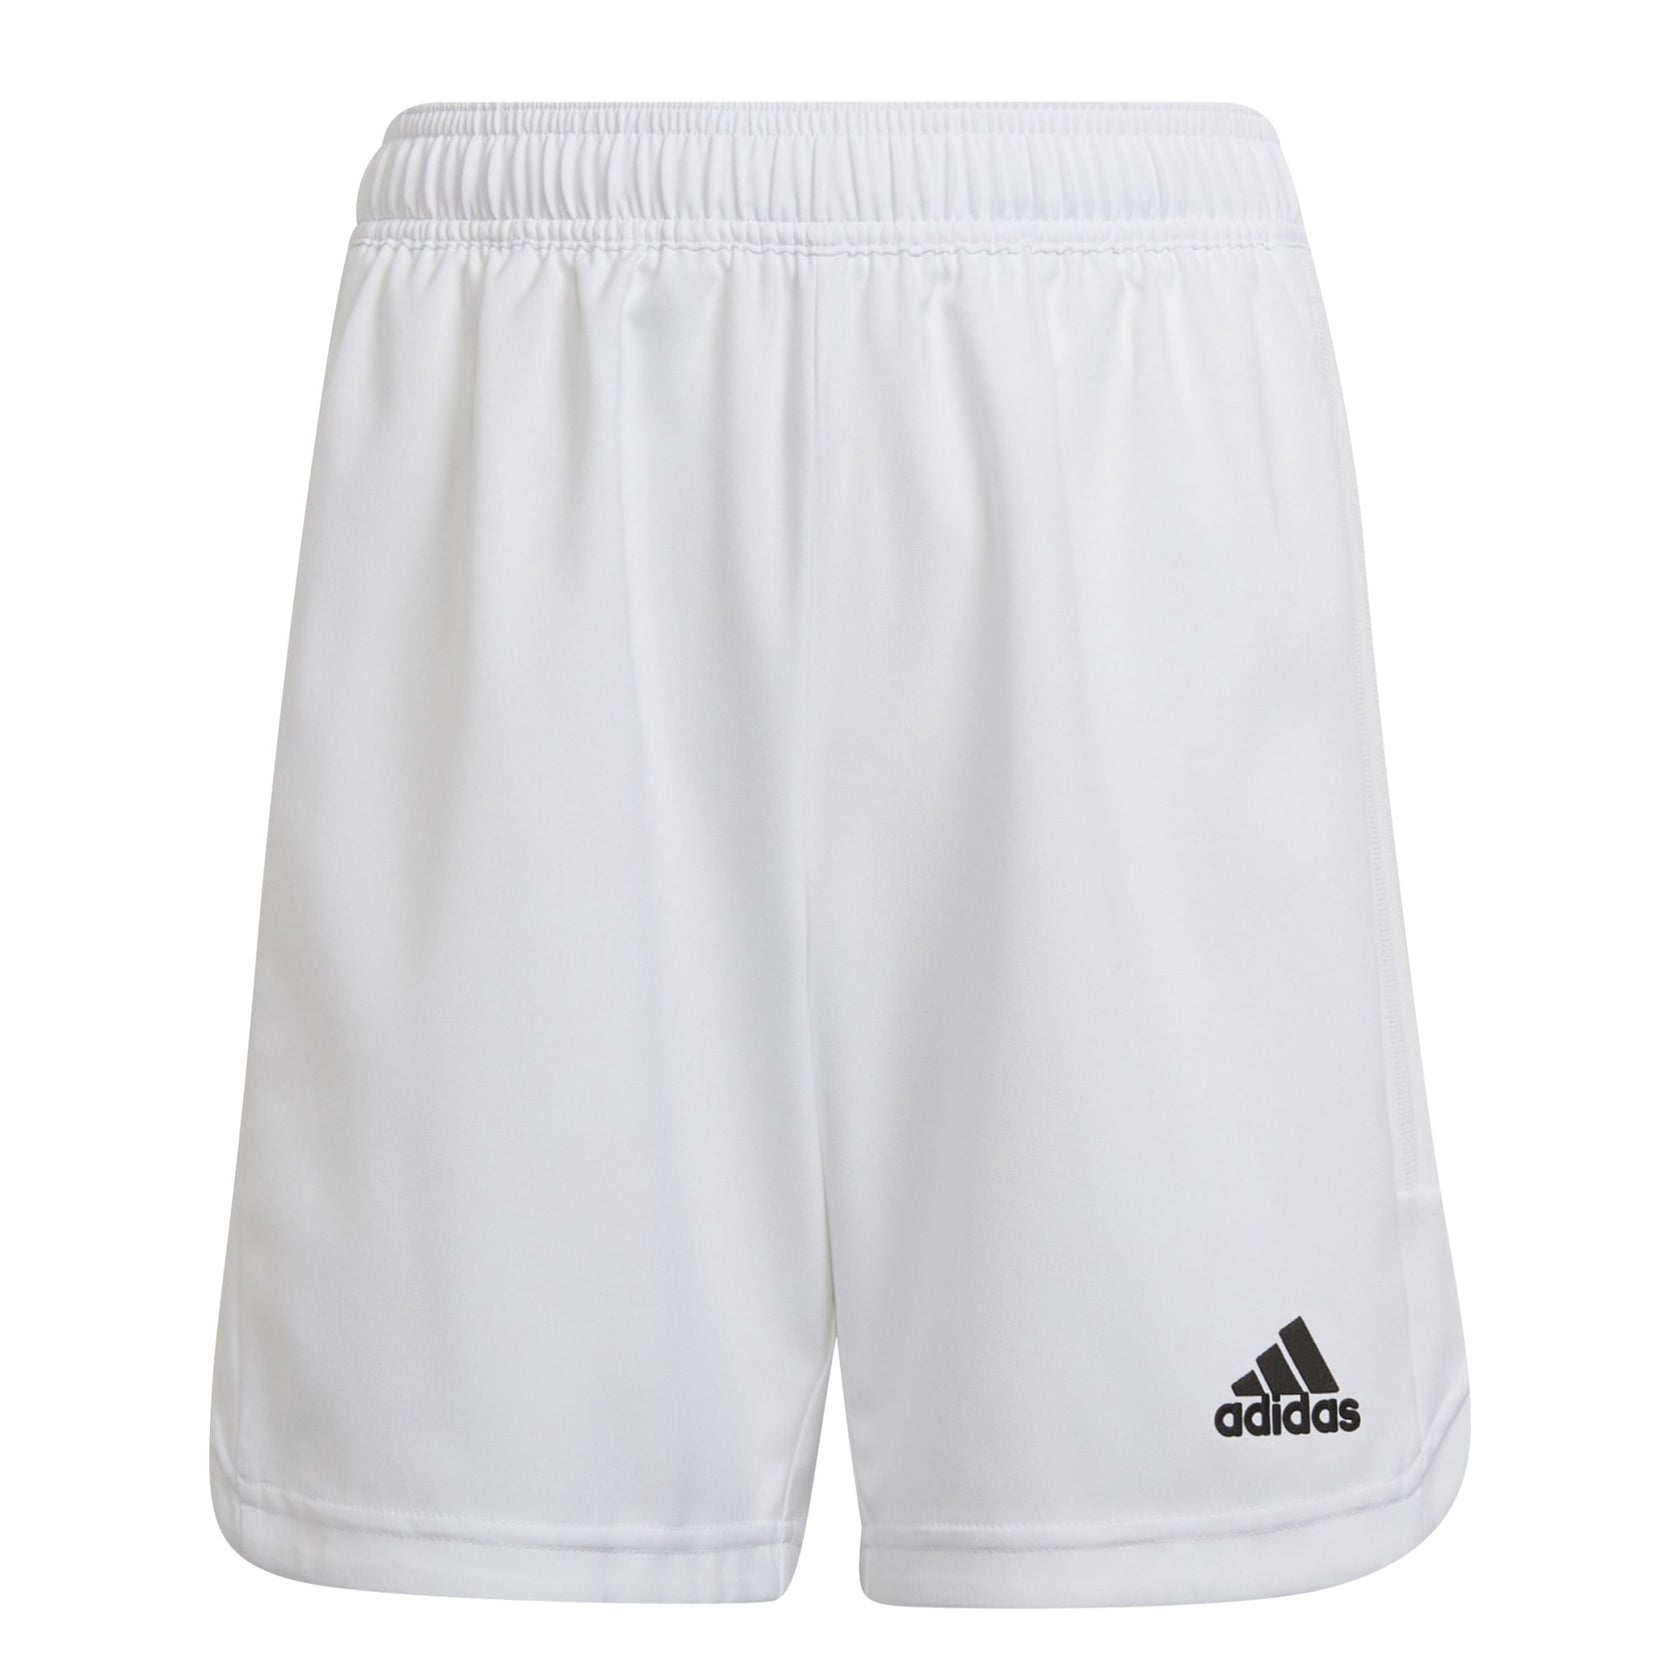 ADIDAS CONDIVO 22 MATCH DAY YOUTH SOCCER SHORT